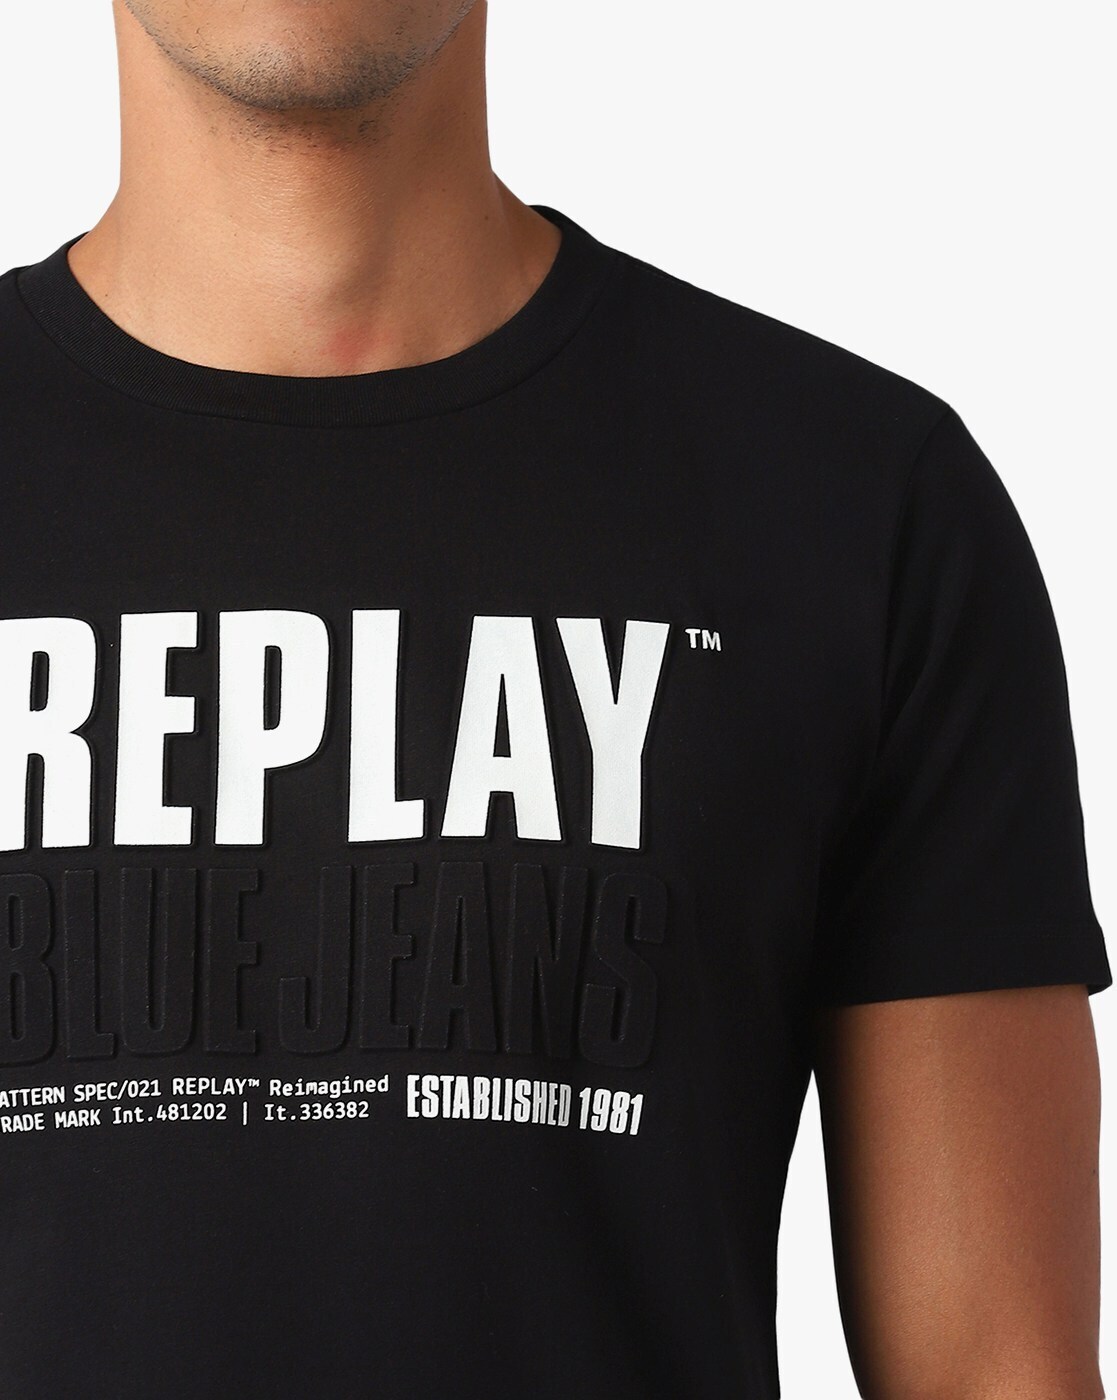 Replay 1981 Vintage T-shirtcool Replay Vintage Top With 